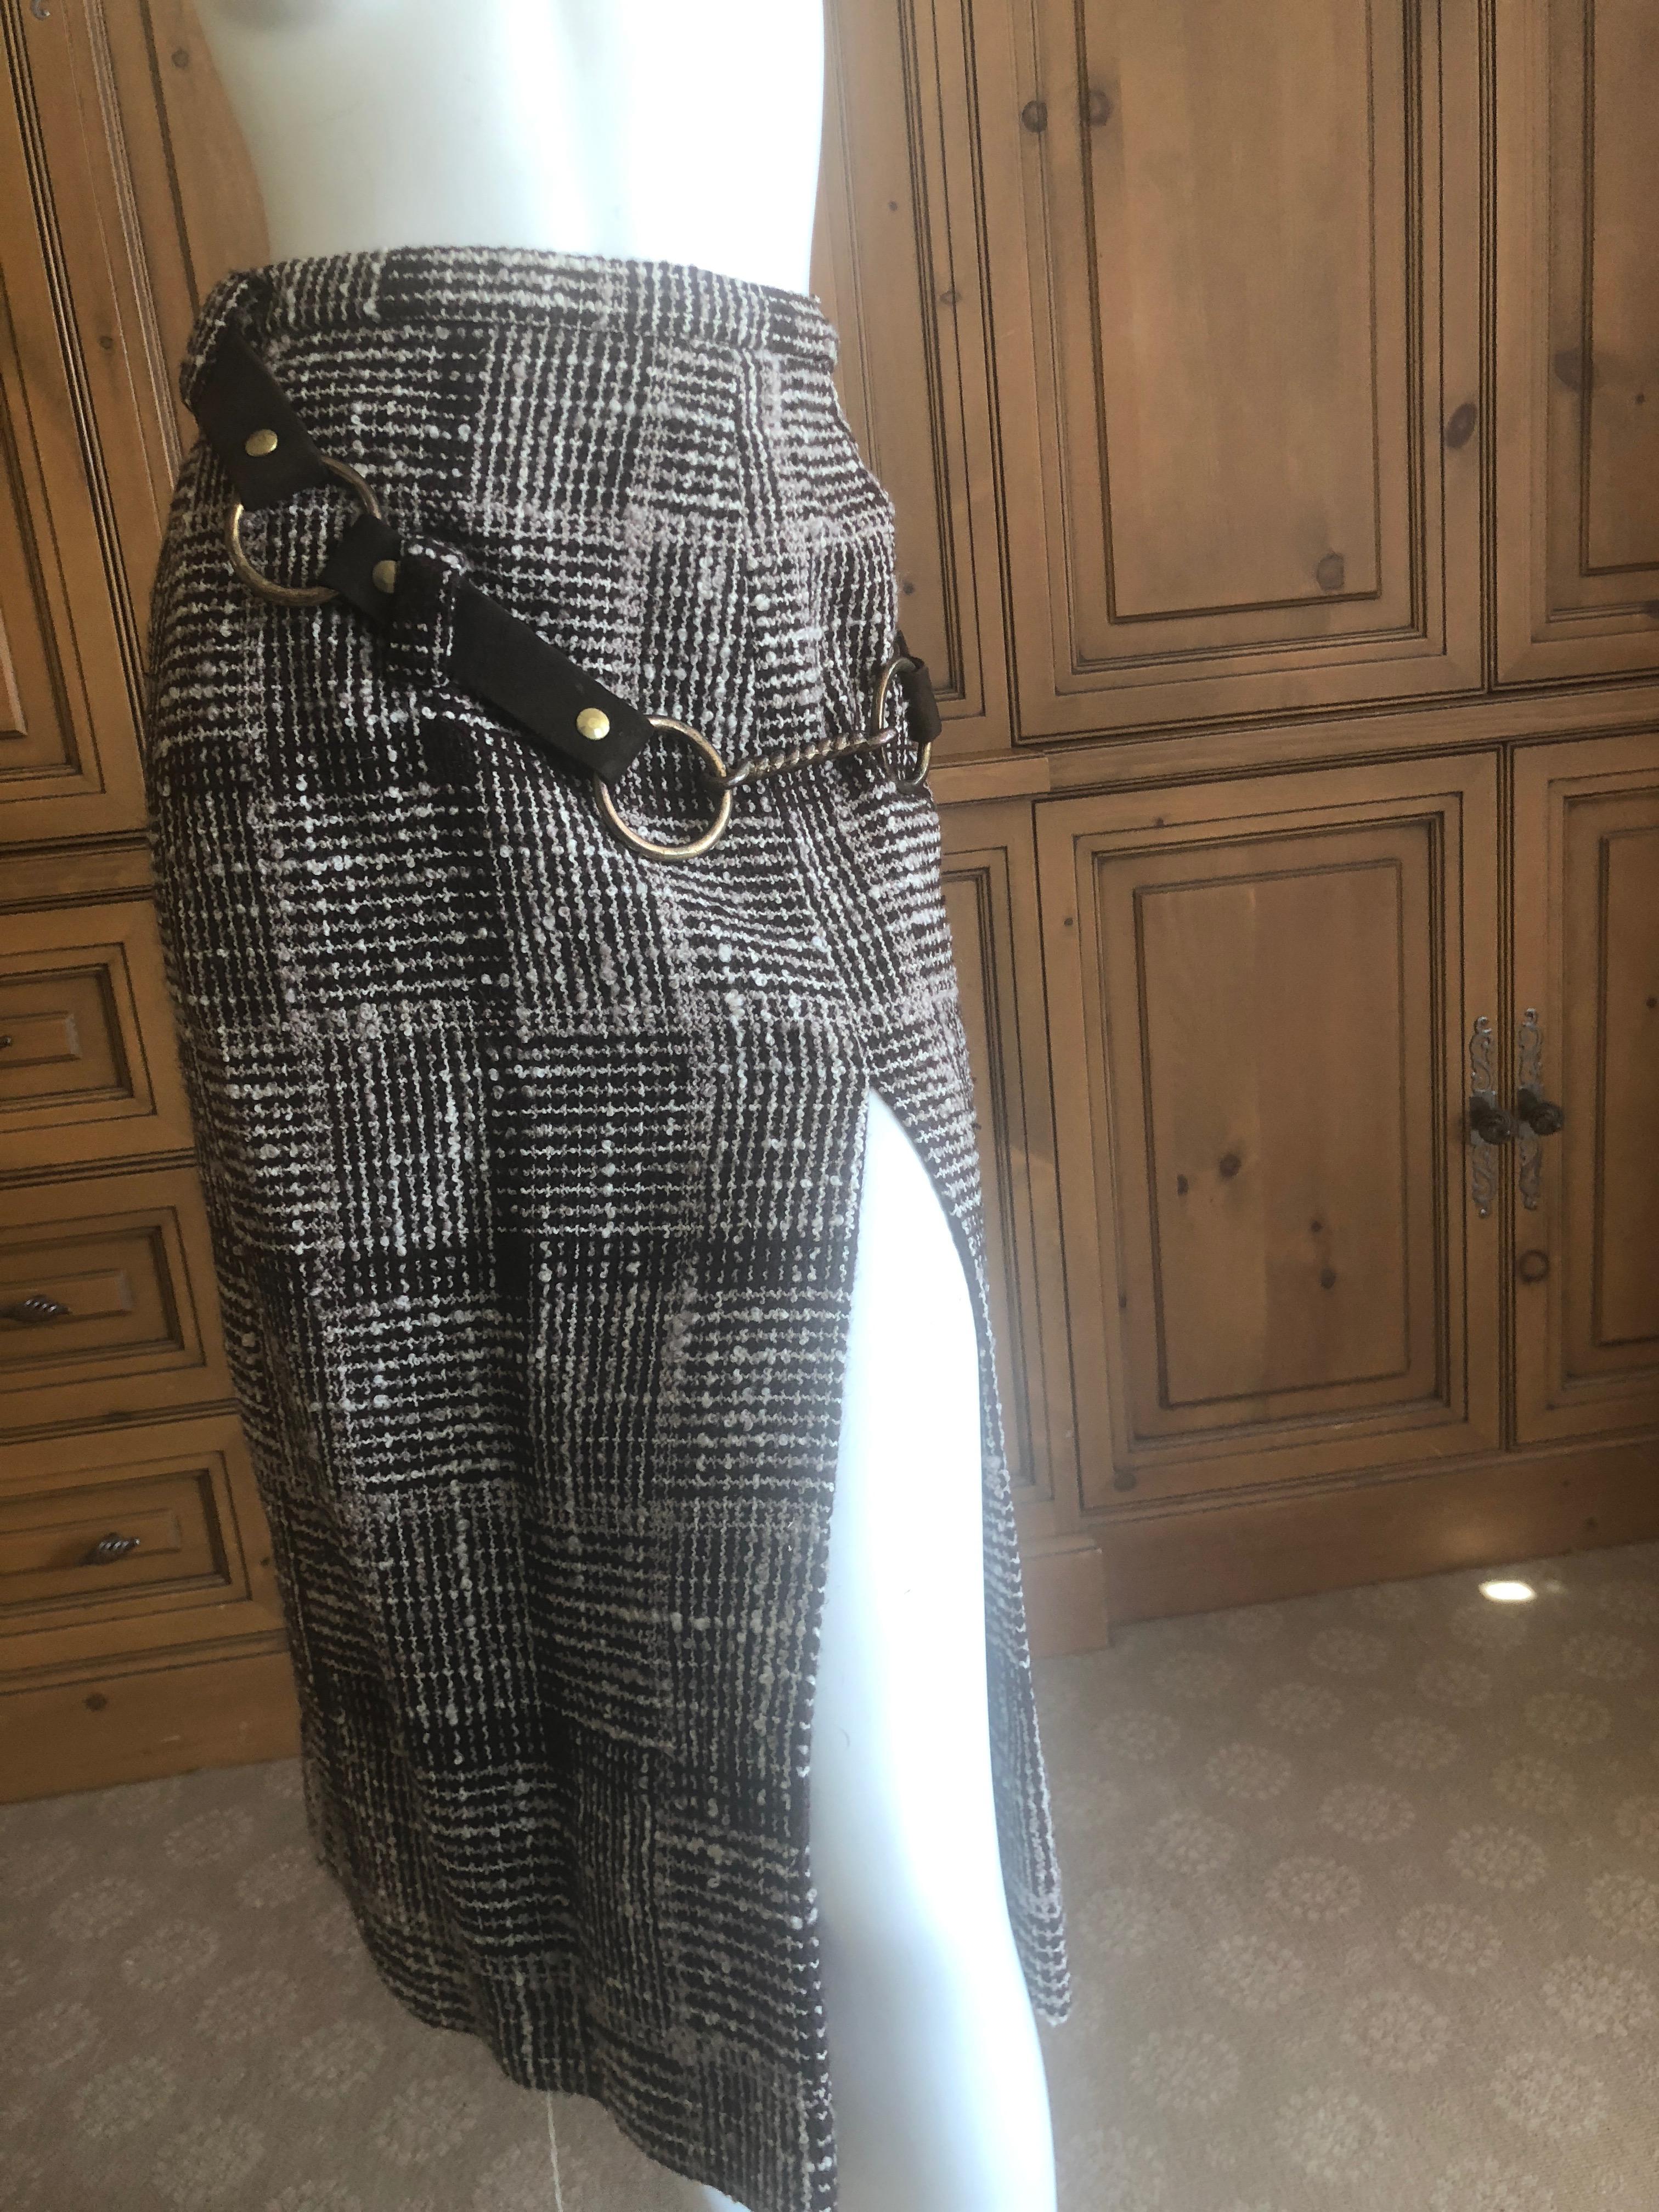 Cardinali Plaid Tweed Skirt with Brass Hardware and Leather Belt Straps

From the Archive of Marilyn Lewis, the creator of Cardinali
Cardinali was founded in Los Angeles in 1970, by Marilyn Lewis, who had already found success as the founder and